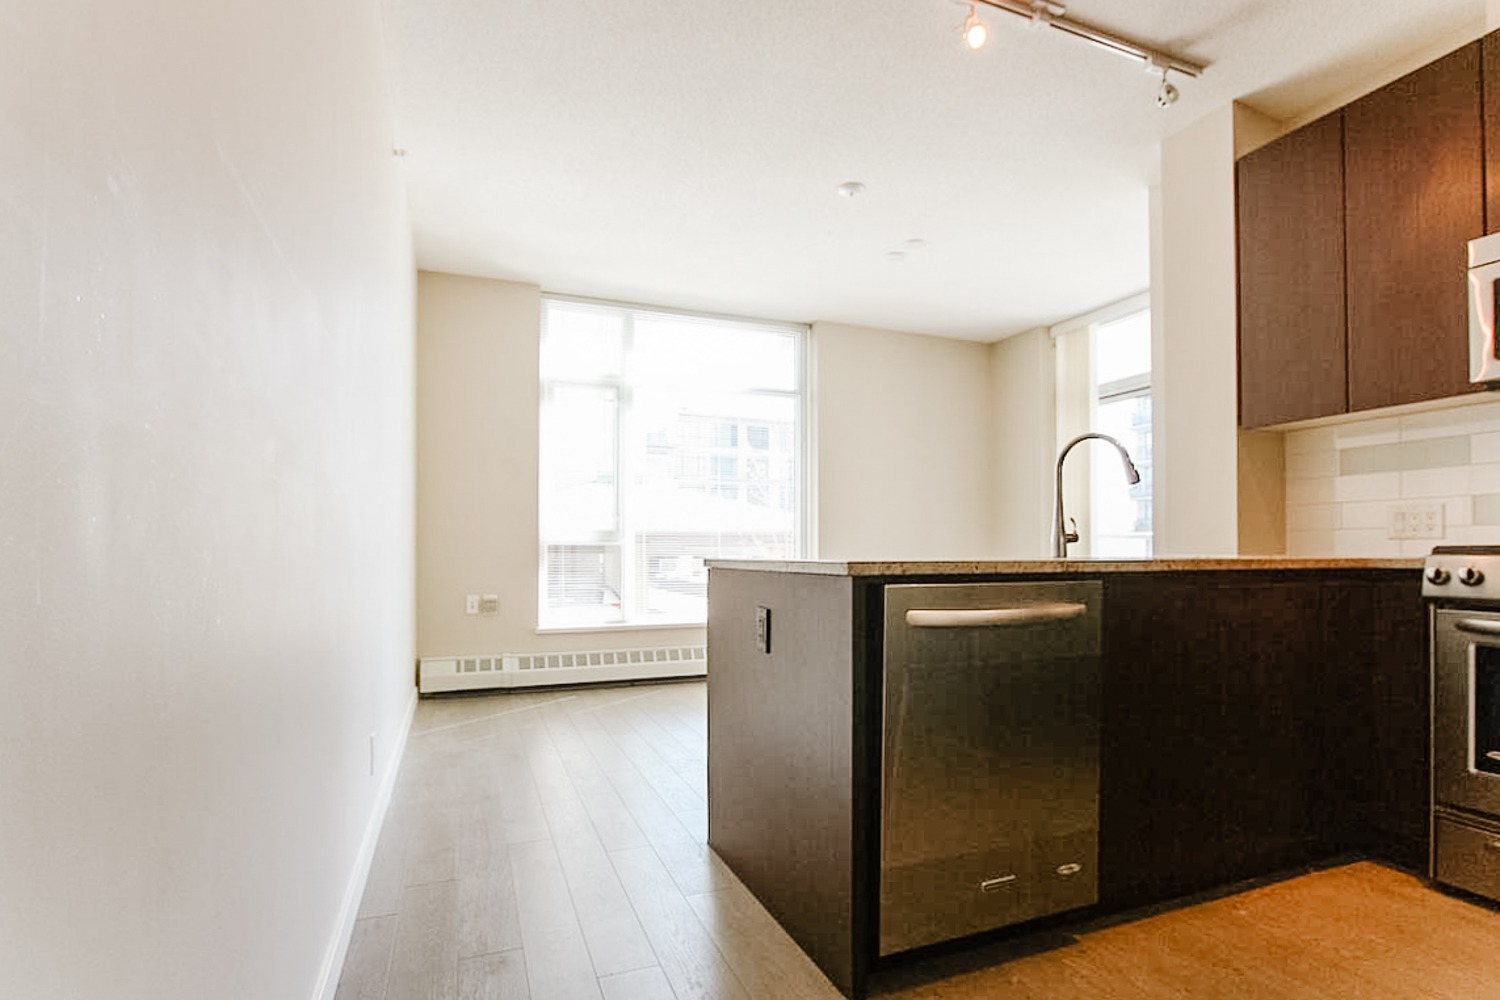 one-bedroom-condo-for-rent-in-lower-lonsdale-north-vancouver-12